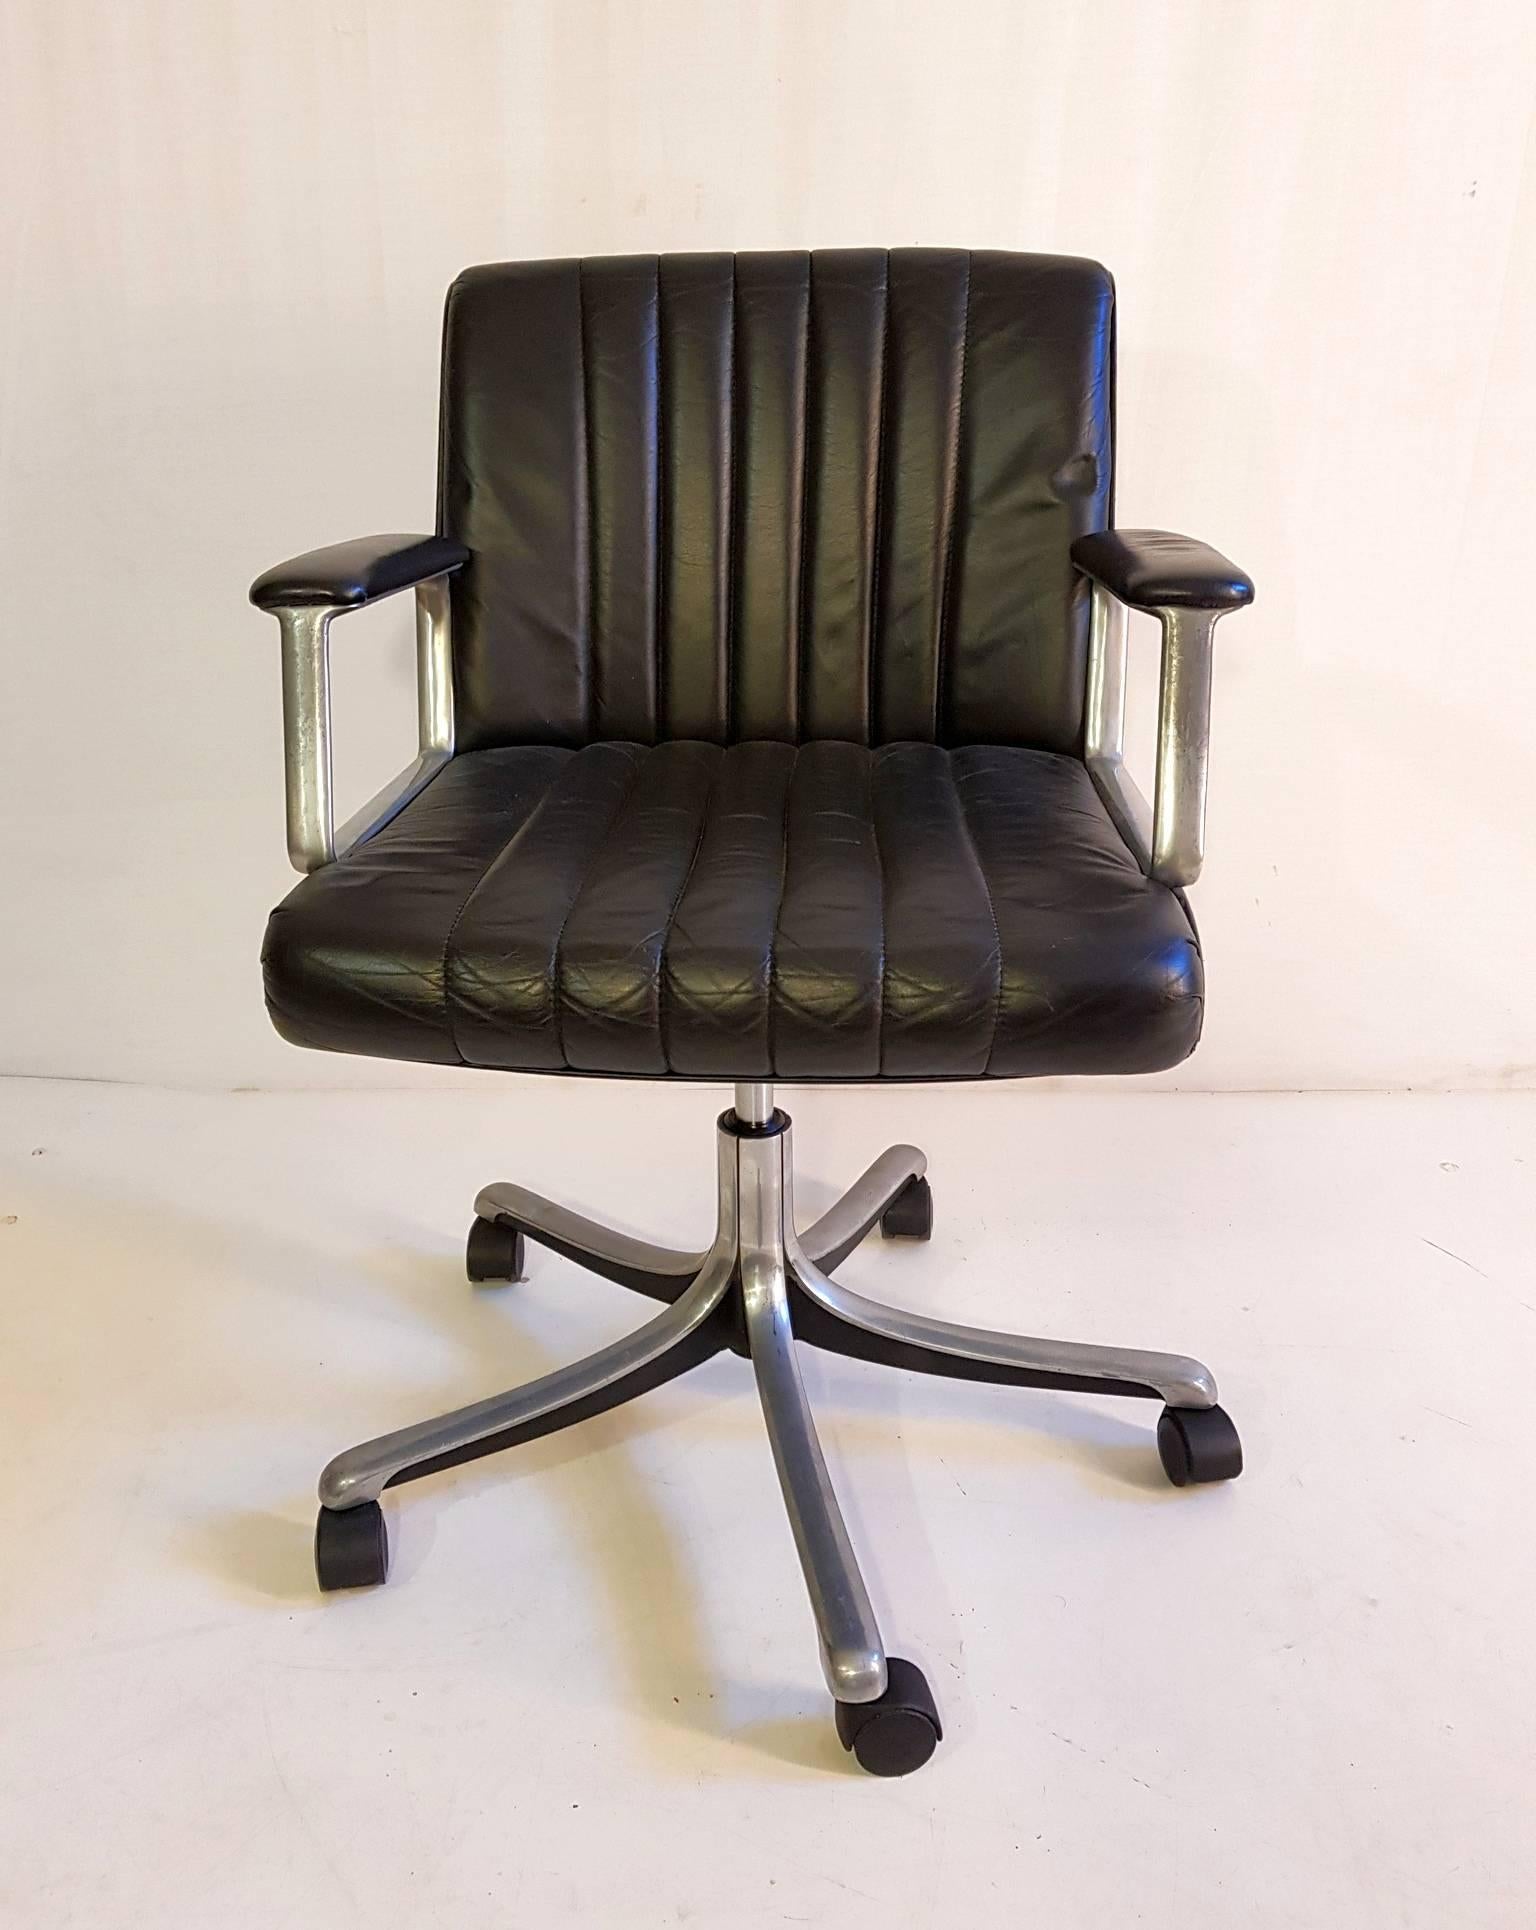 Iconic swivel office chair on wheels by Osvaldo Borsani for Tecno with adjustable in height that functions well. The difference in height is about 7 cm from the highest to the lowest position. In good condition with minor wear.
Measures: Seat